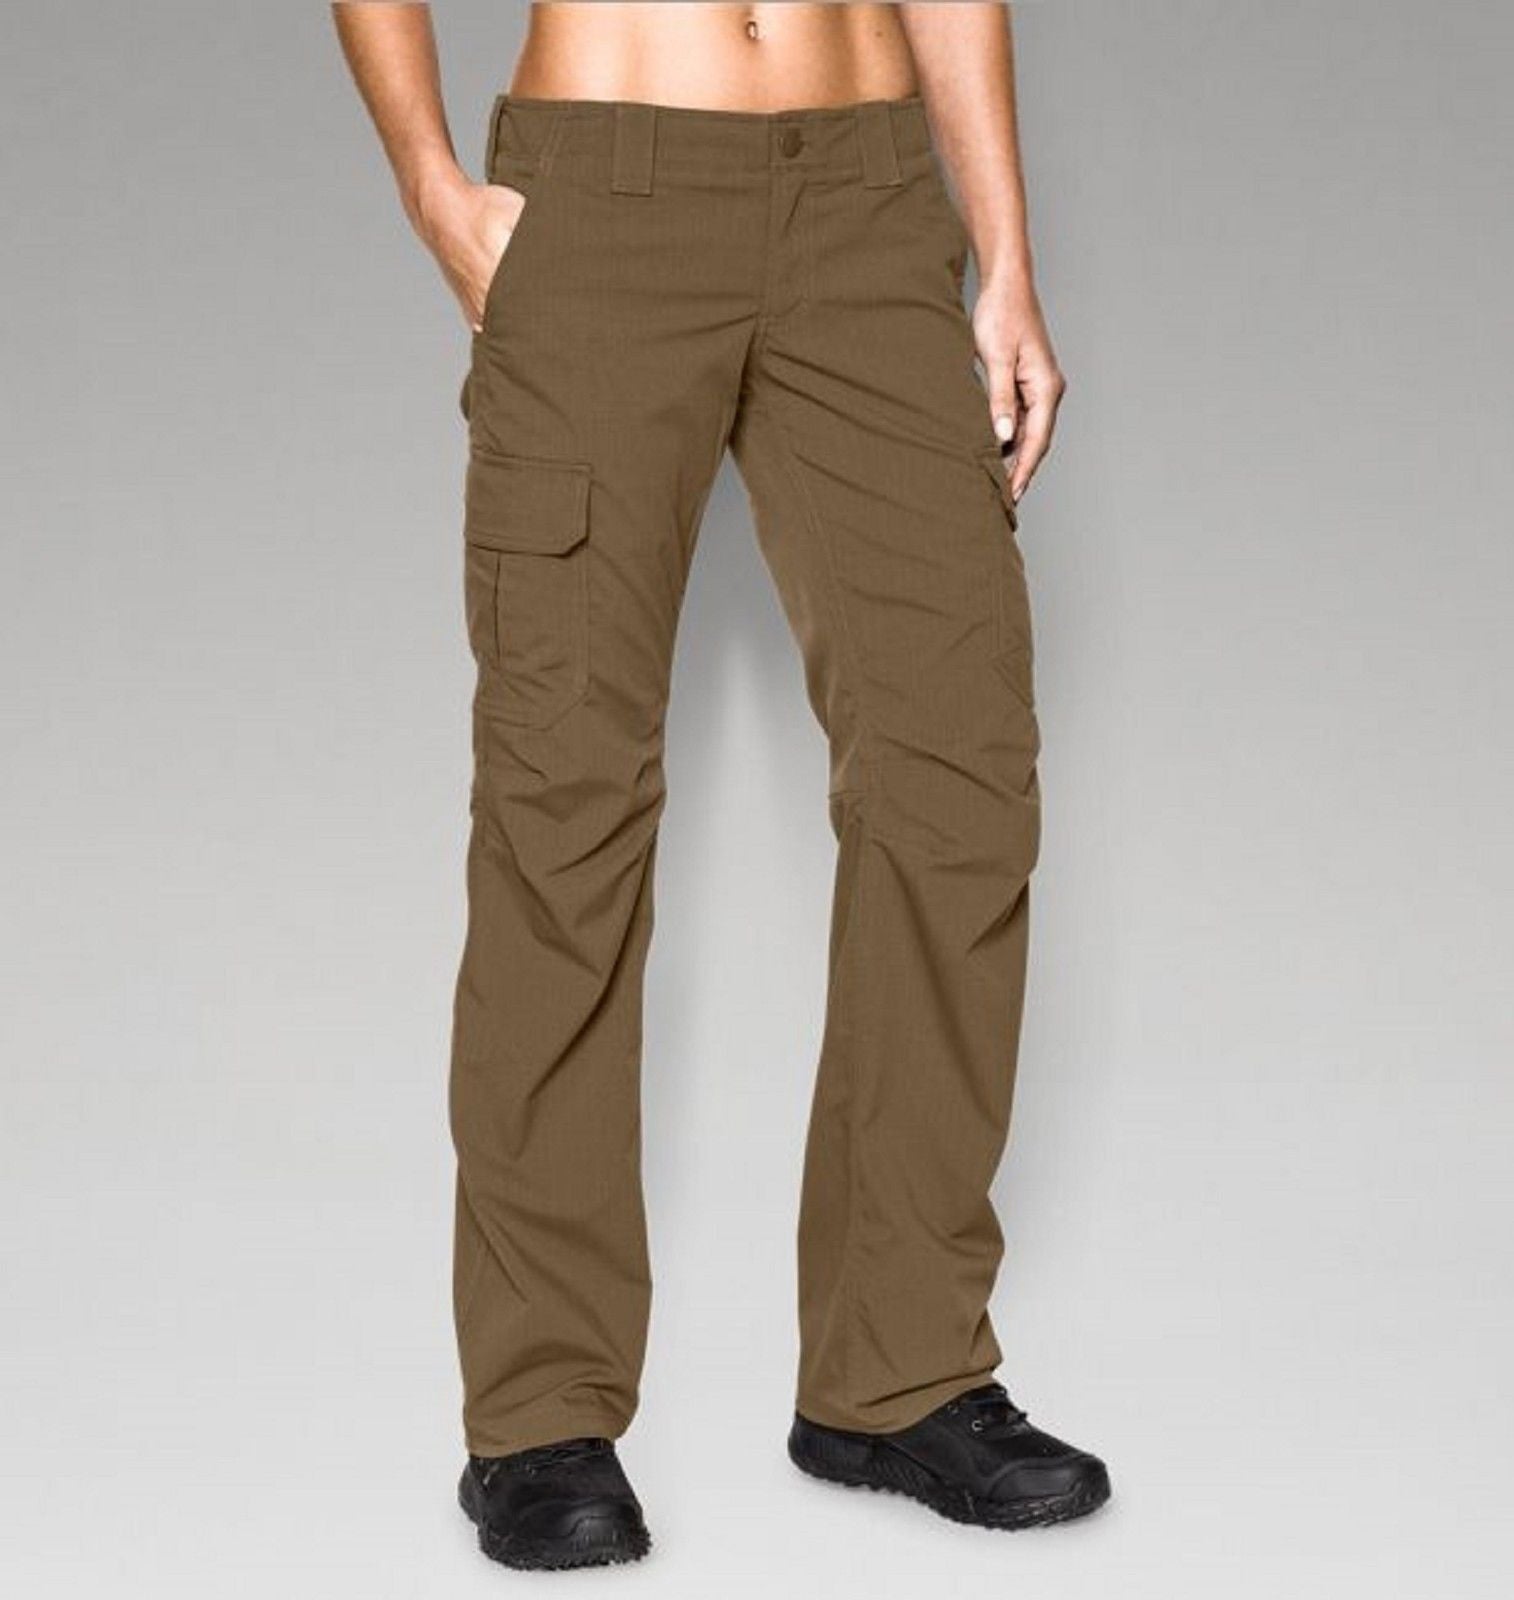 Under Armour Womens Tactical Patrol Pants 1254097-220 Coyote Brown New  Retail 80